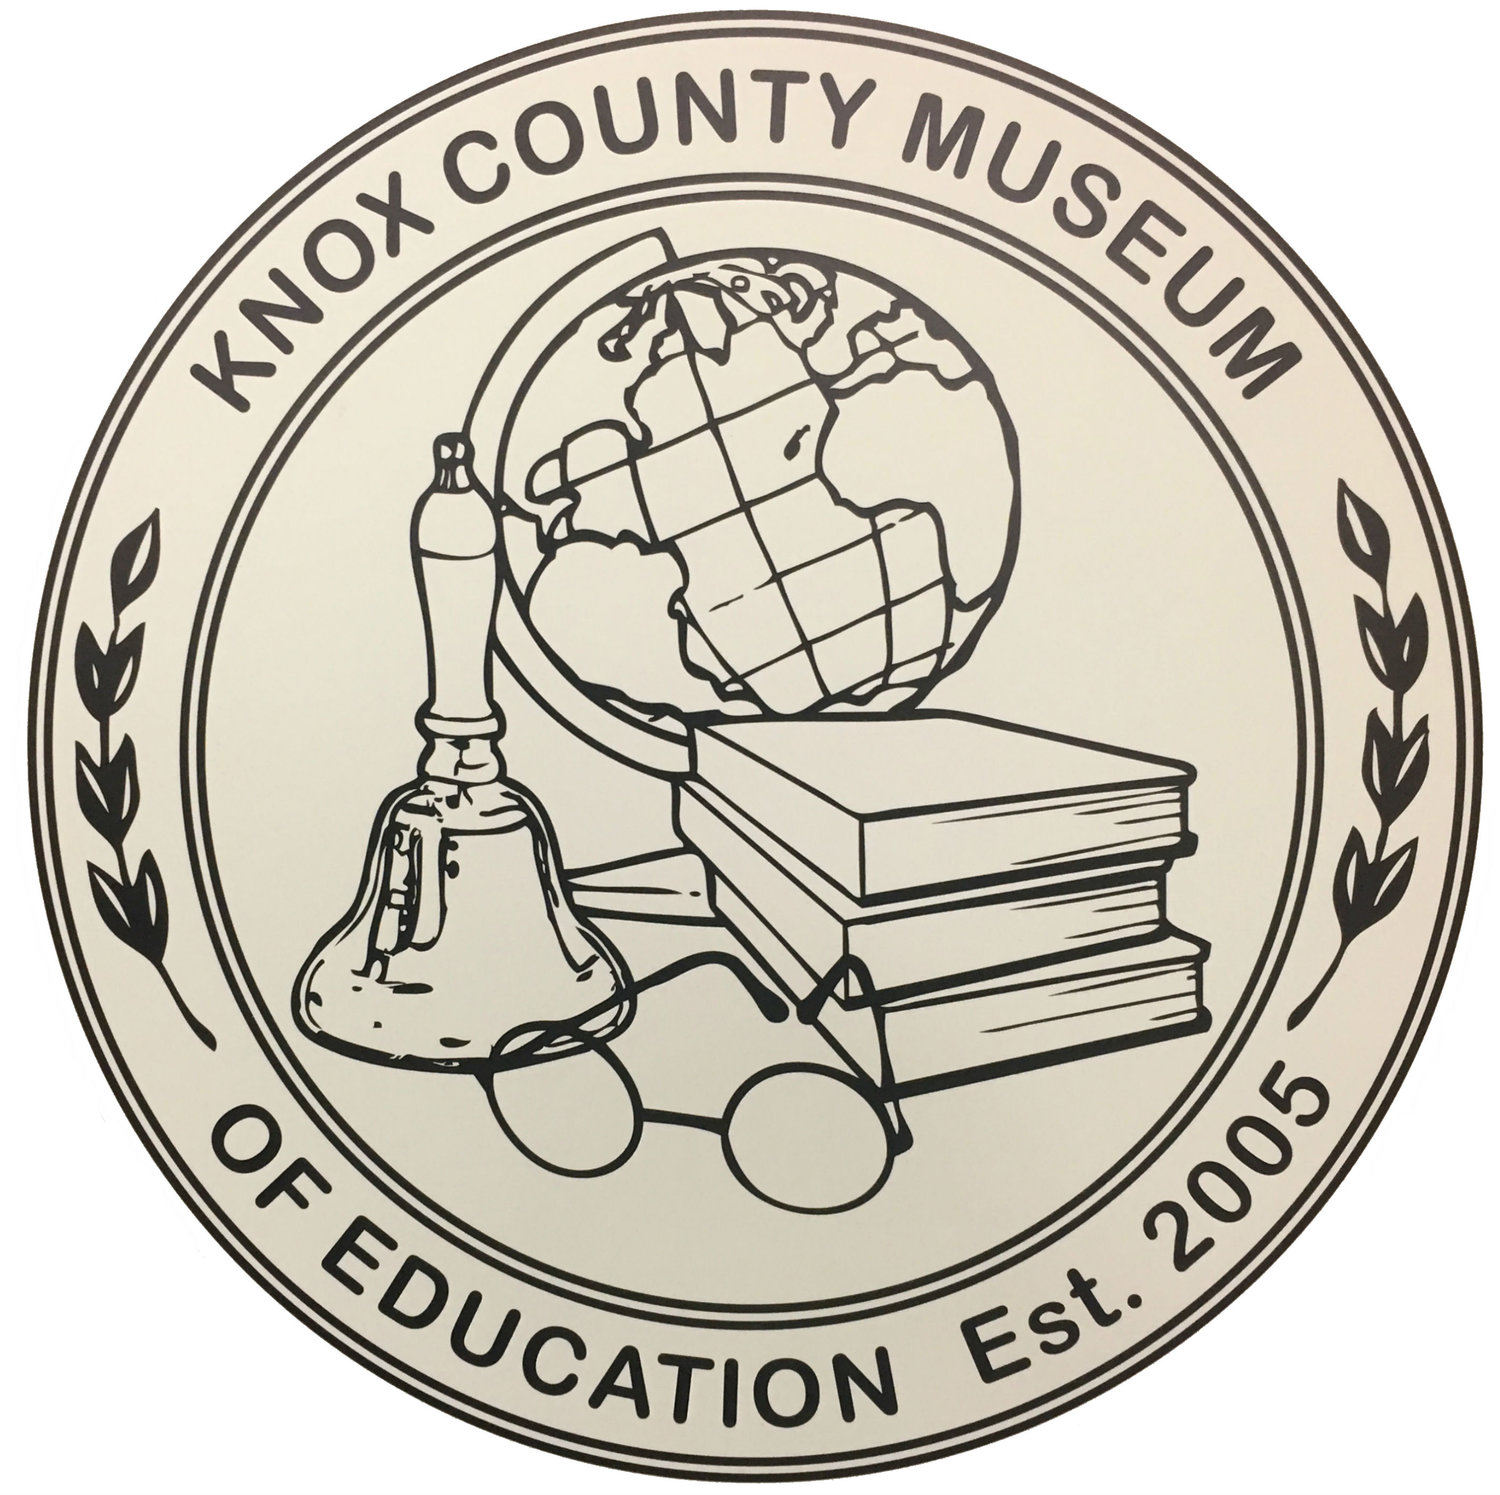 Knox County Museum of Education